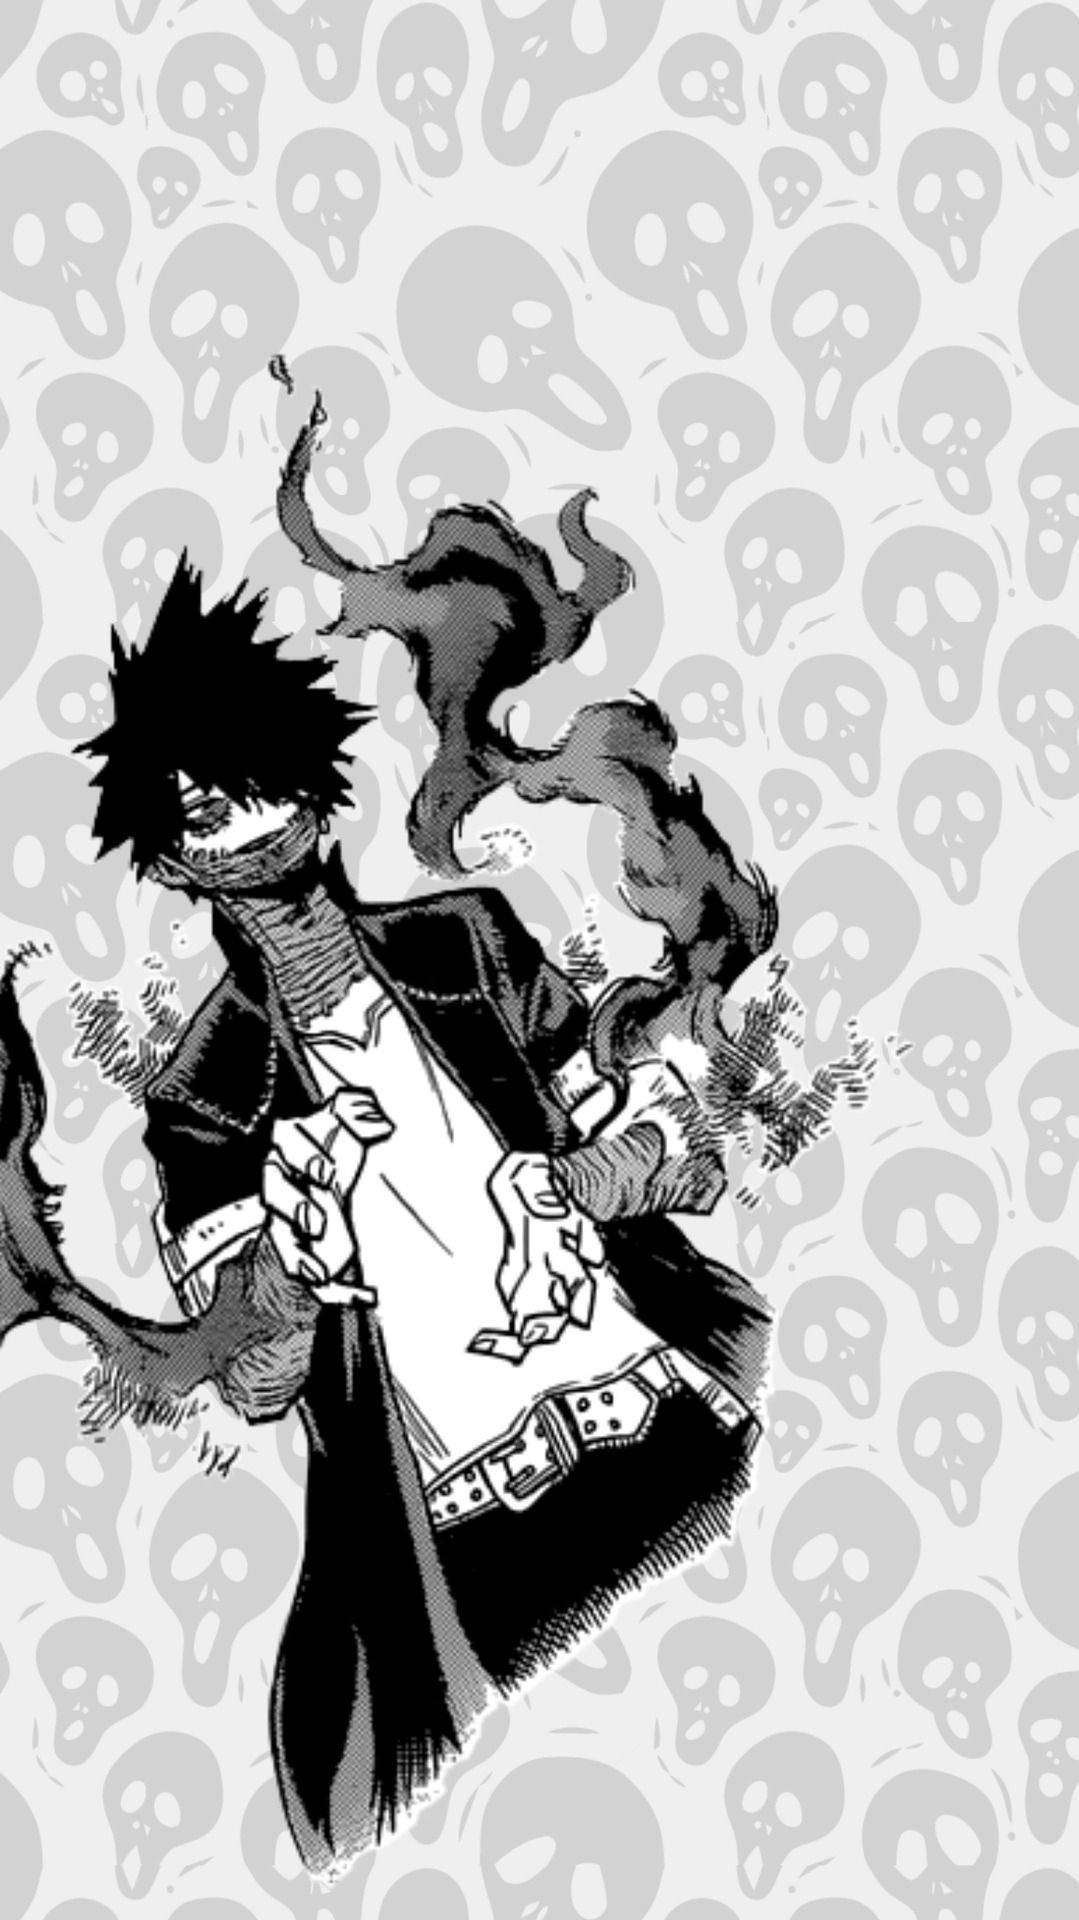 Relax and take in the beauty of Dabi Aesthetic Wallpaper